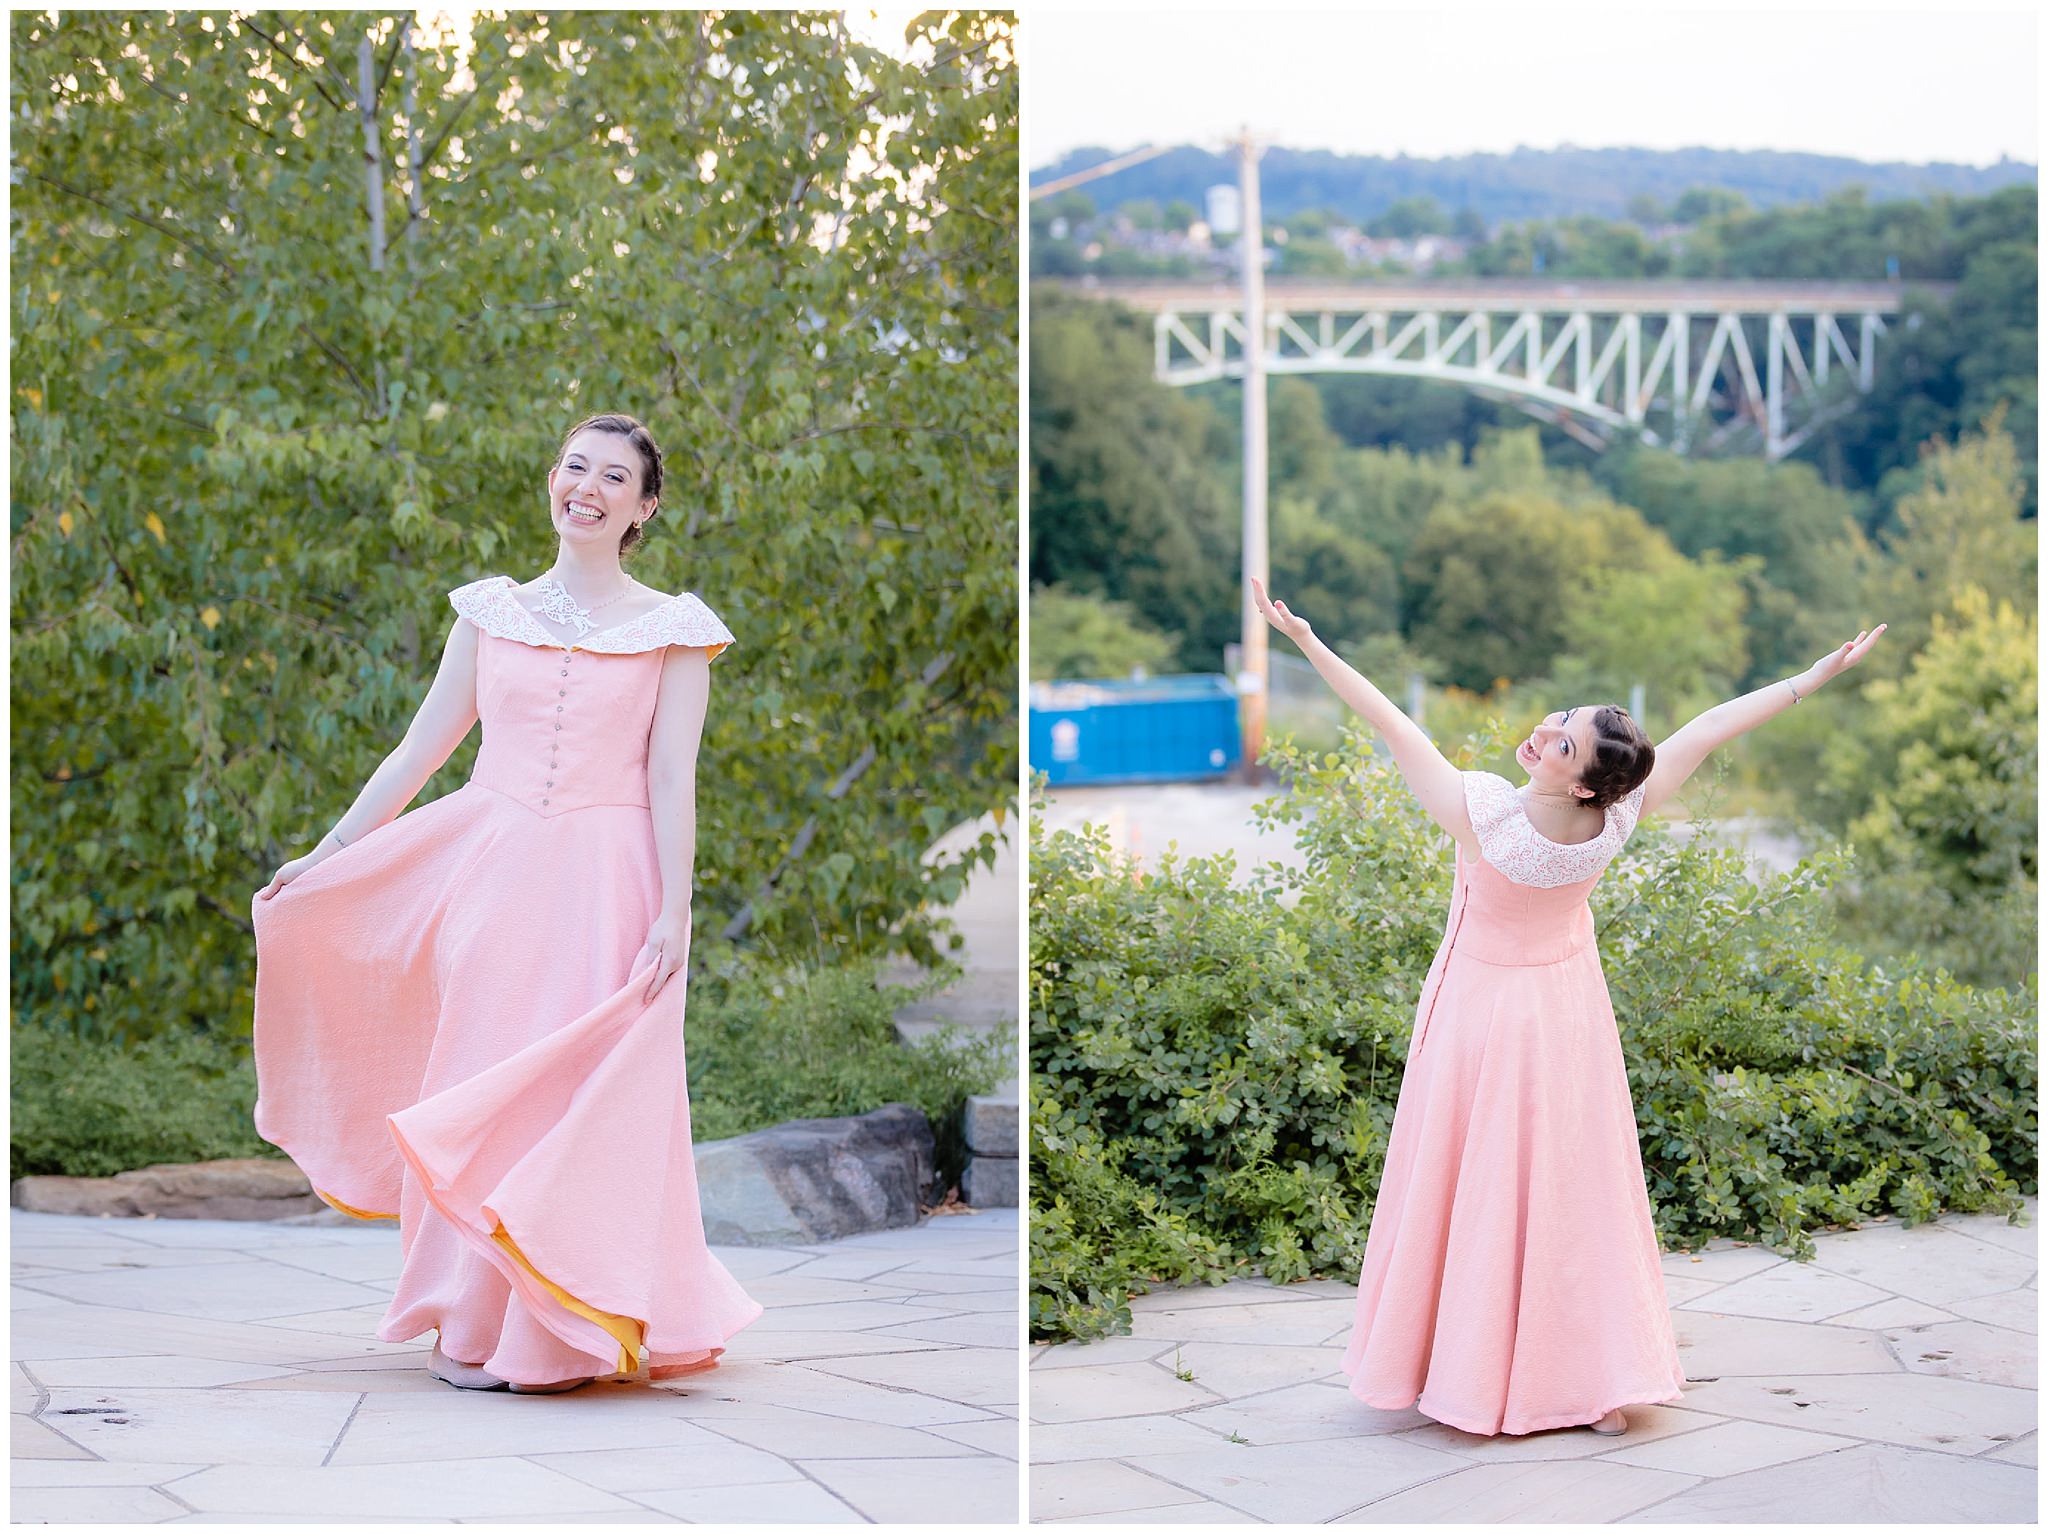 Bride wears a custom-made pink dress with white lace detail at a Phipps Conservatory wedding